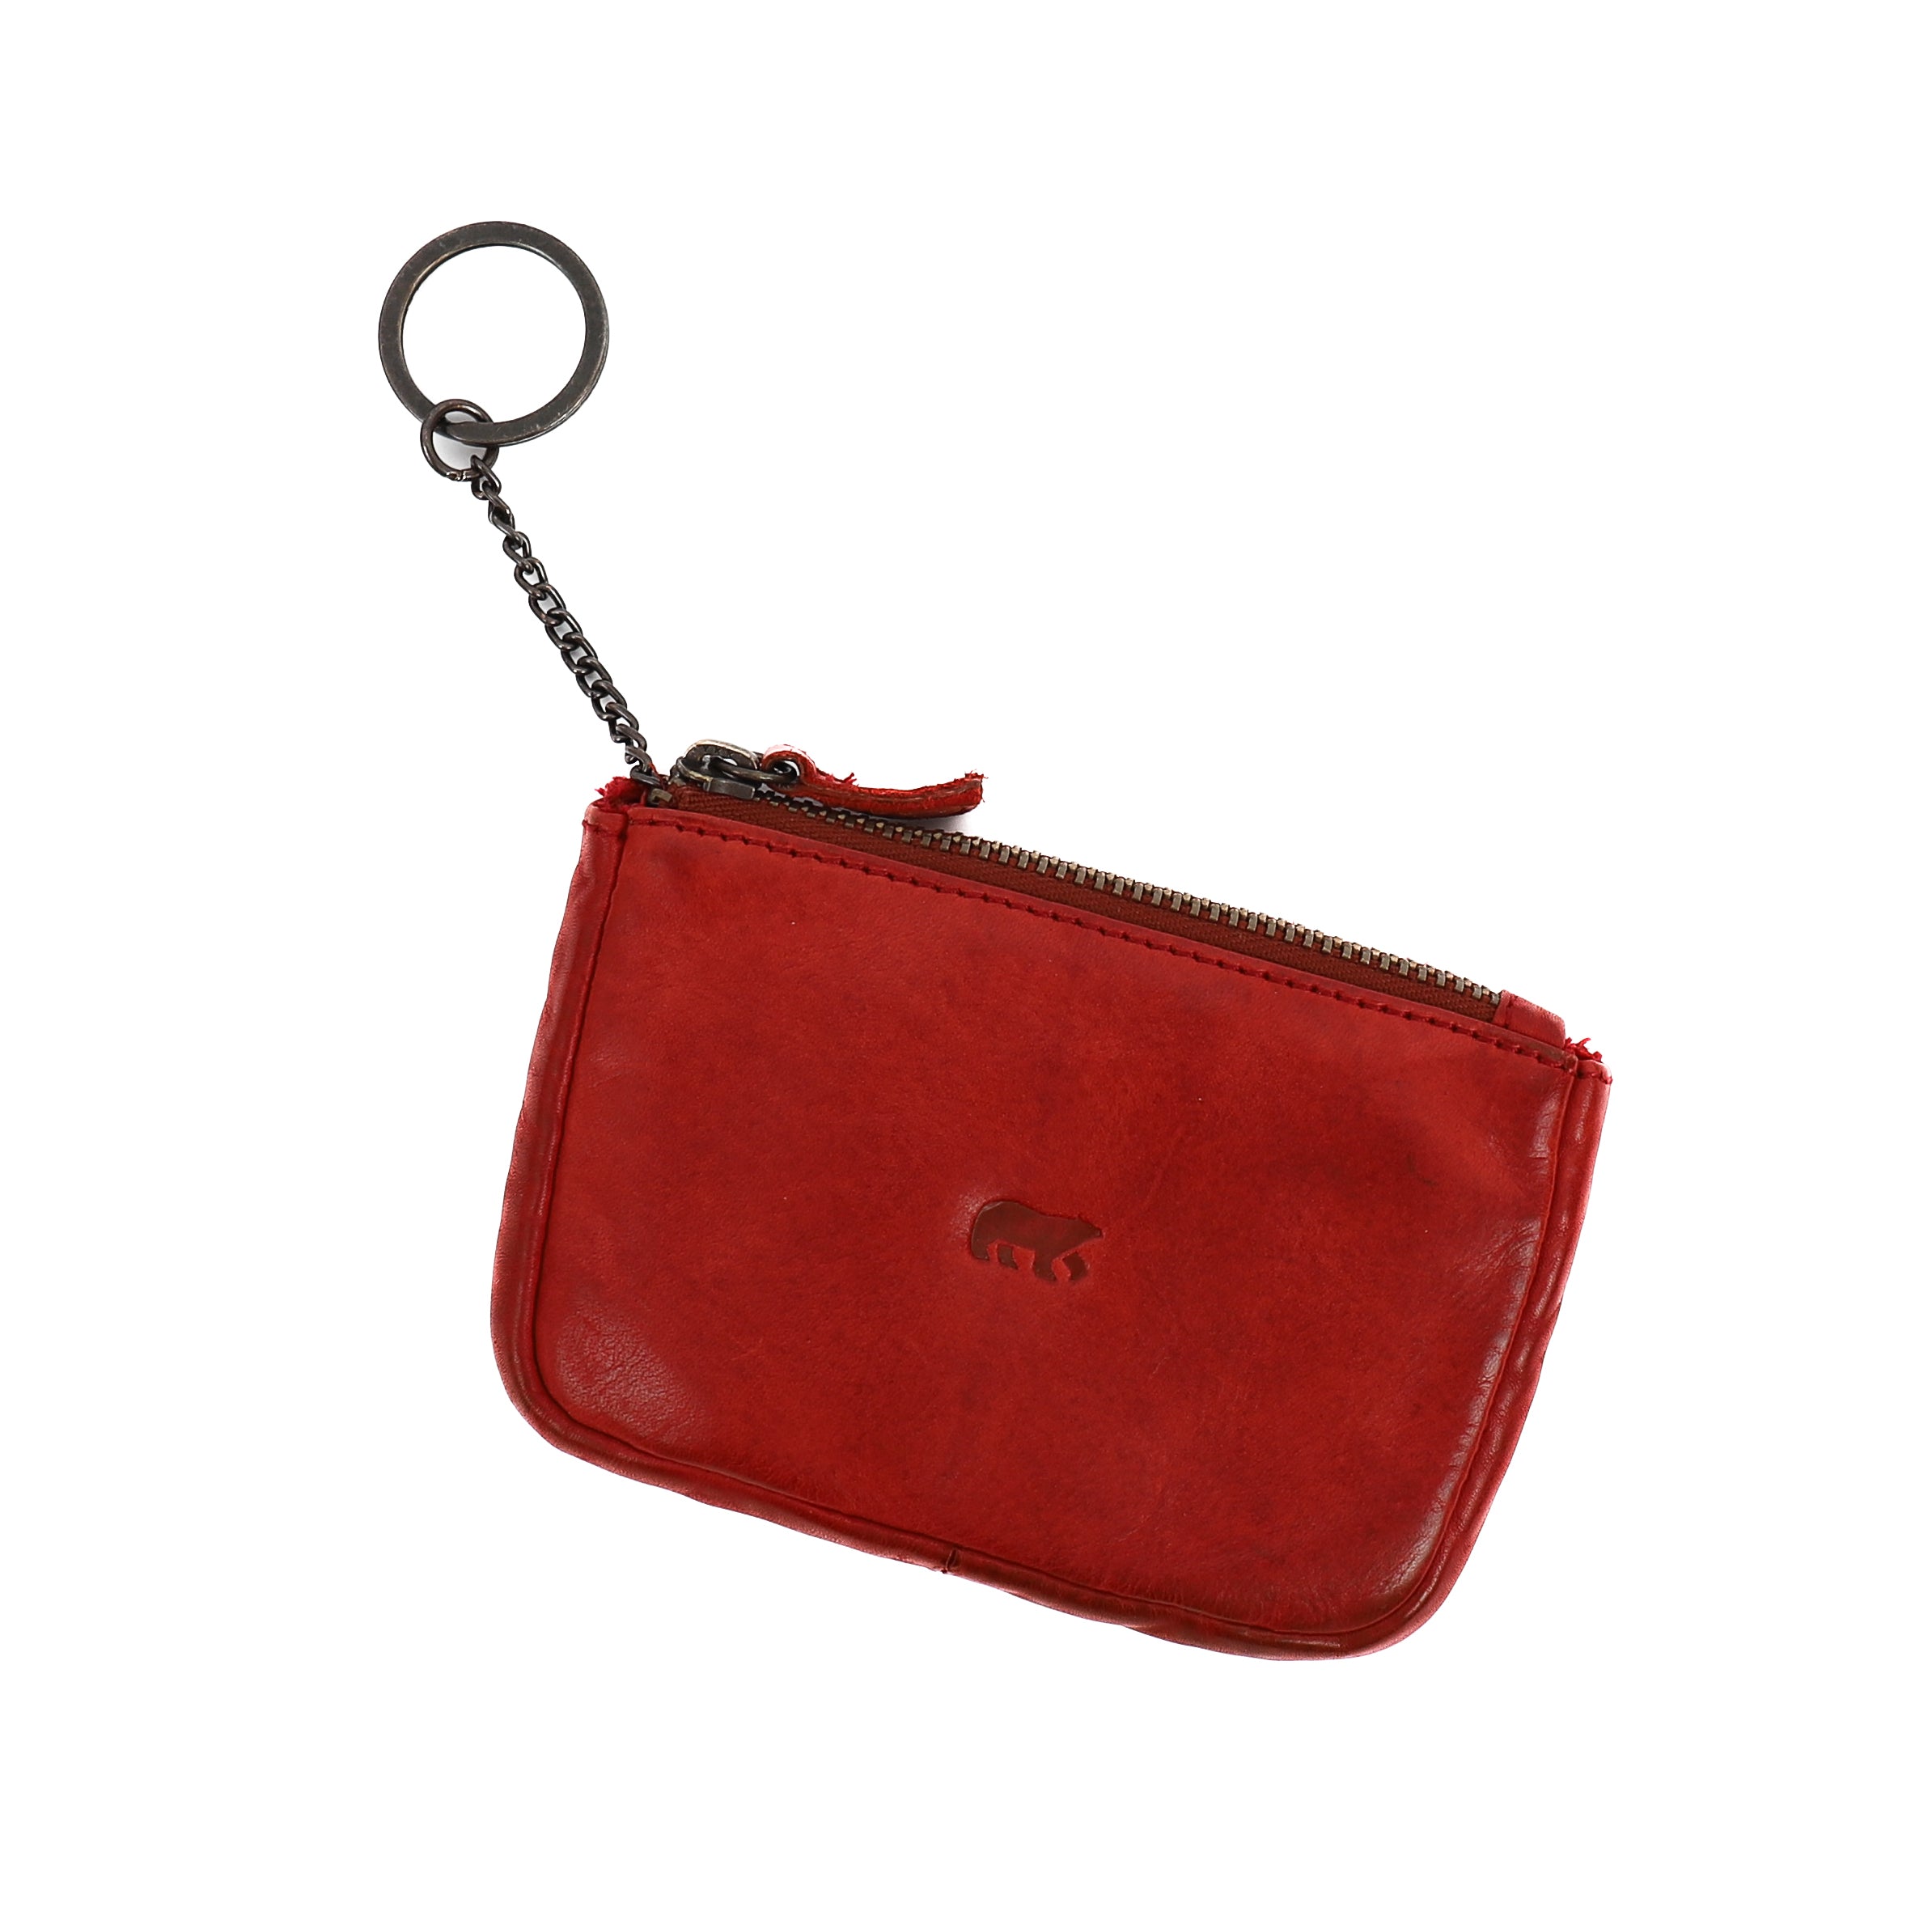 Key pouch 'Timo' red